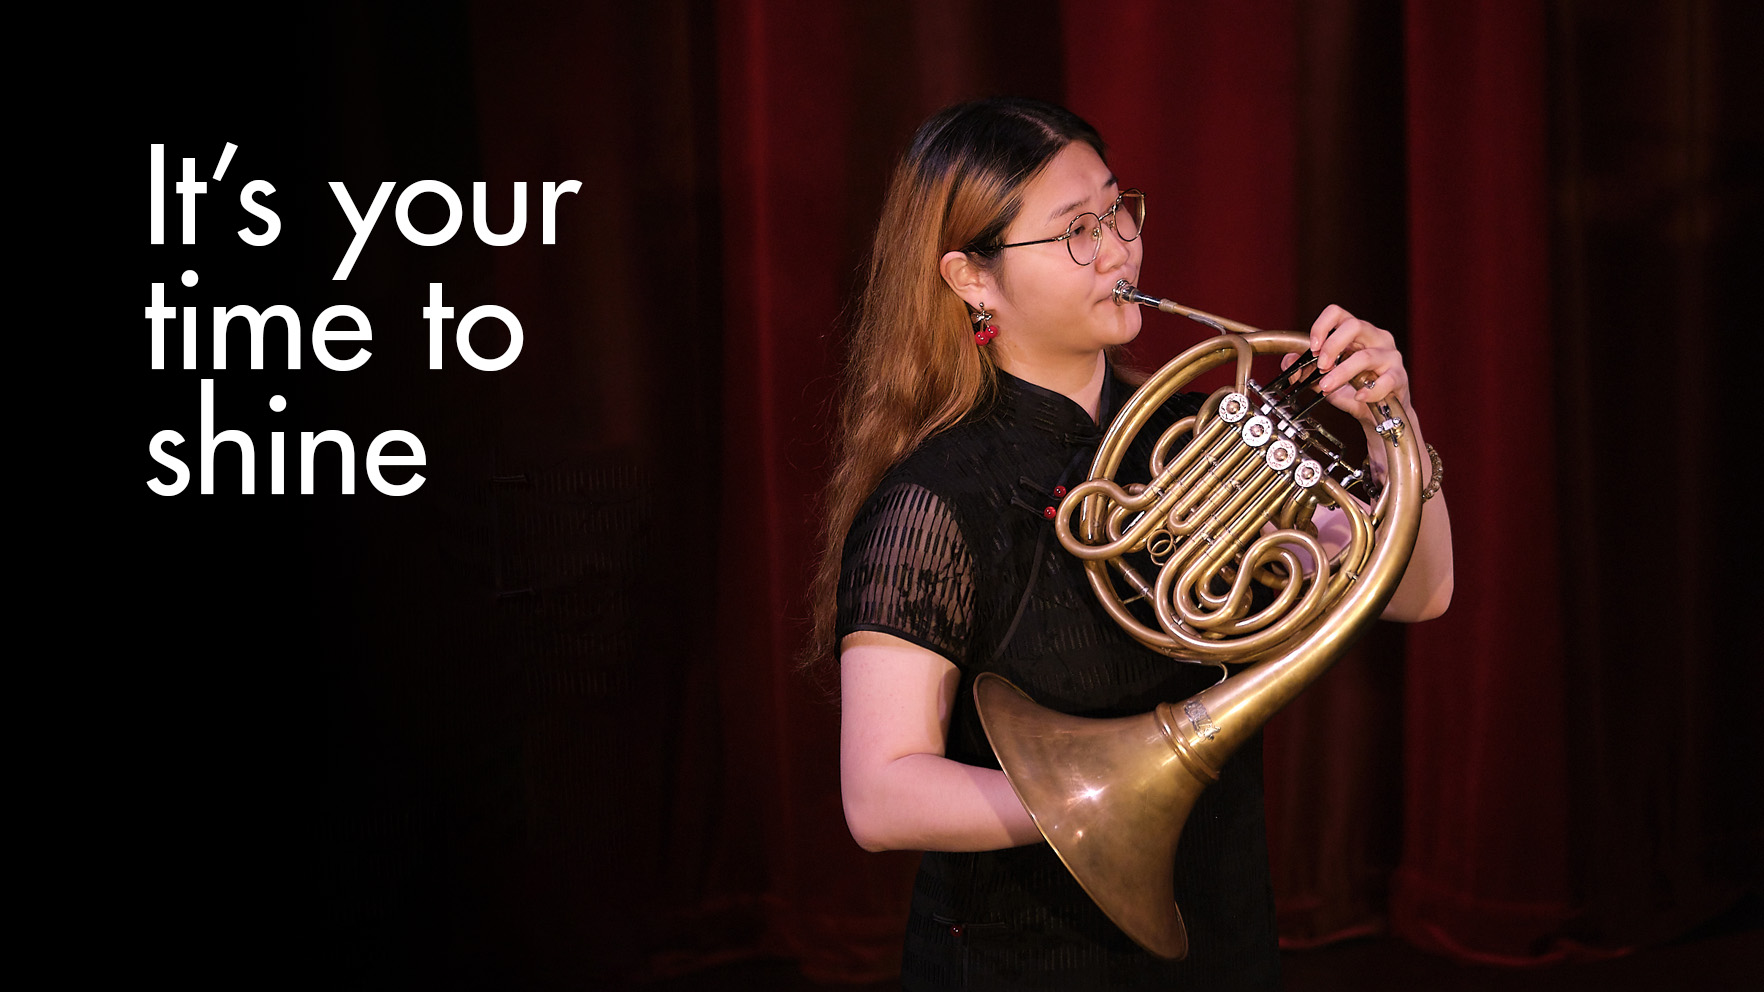 "It's your time to shine". A female Asian student playing the French horn, surrounded with by red curtains on stage.